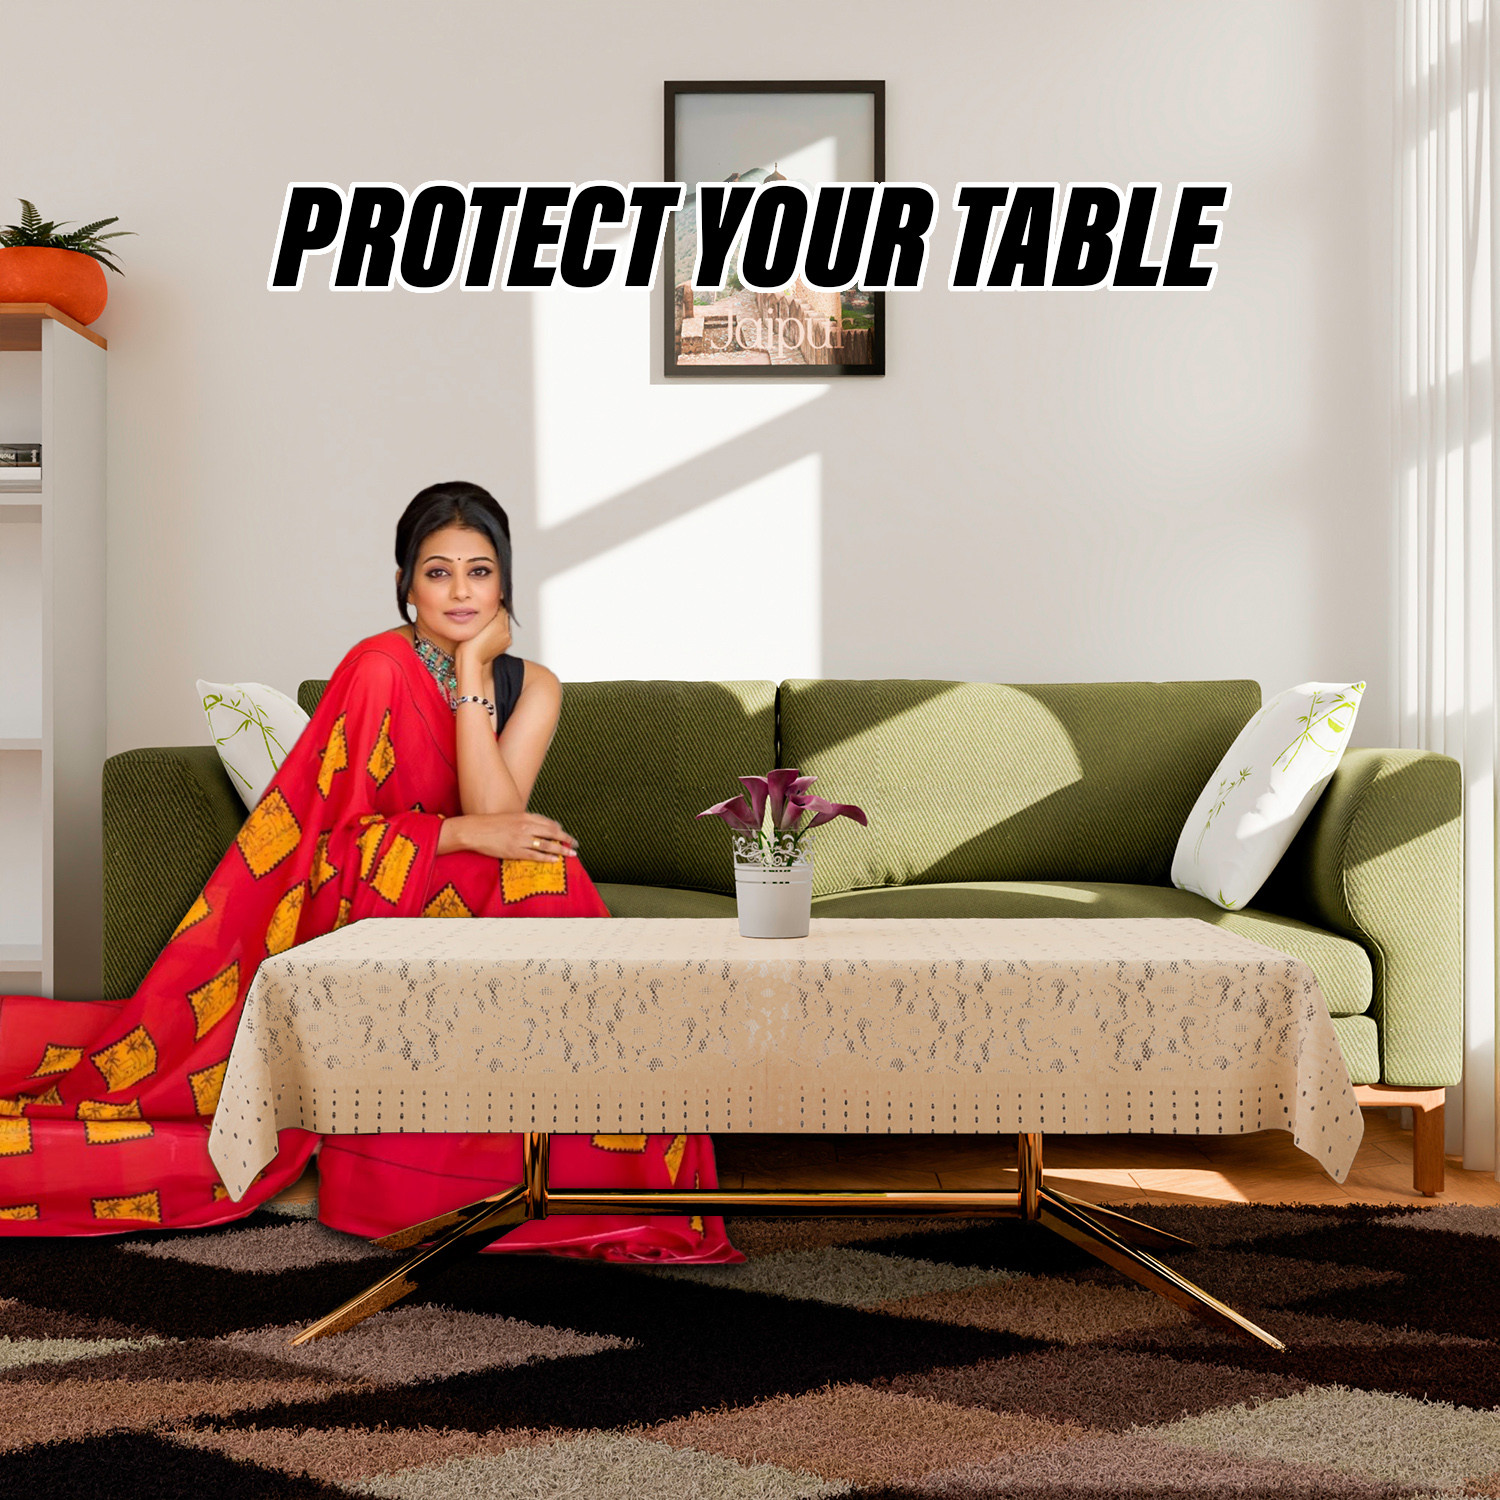 Kuber Industries Center Table Cover | Shinning Net Cashew Design Table Cover | Luxurious Table Protector Cover for Home Decor | 40x60 Inch | Golden